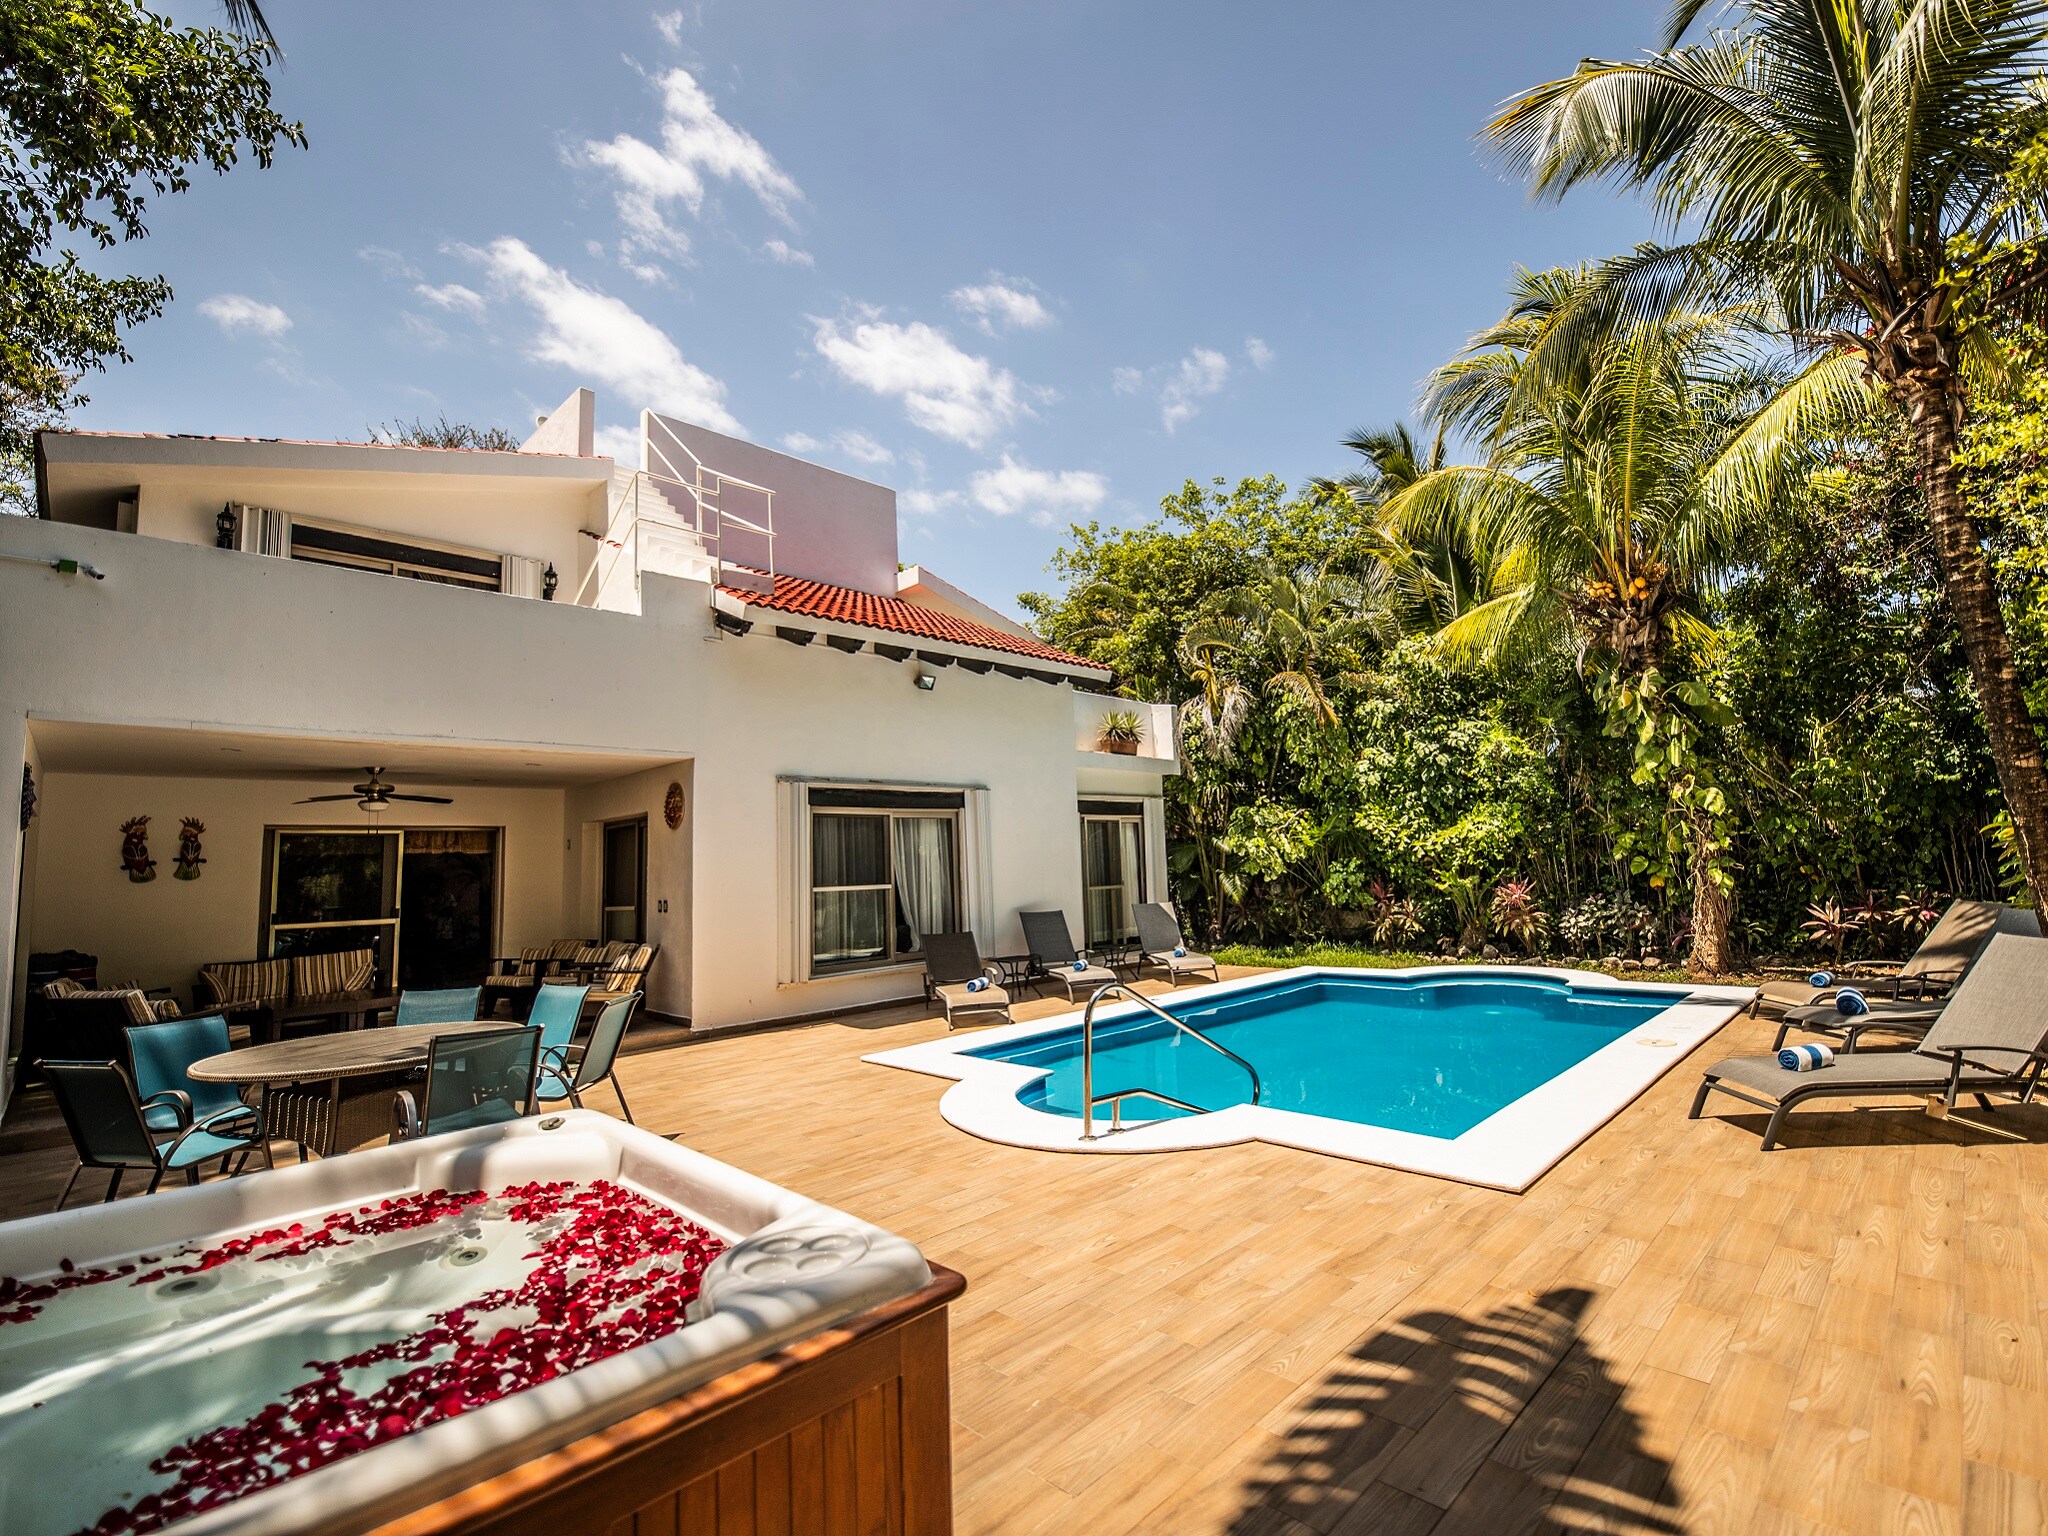 Property Image 1 - Villa Holiday Private Pool, Jacuzzi, Barbecue, Family Friendly, Golf Course!